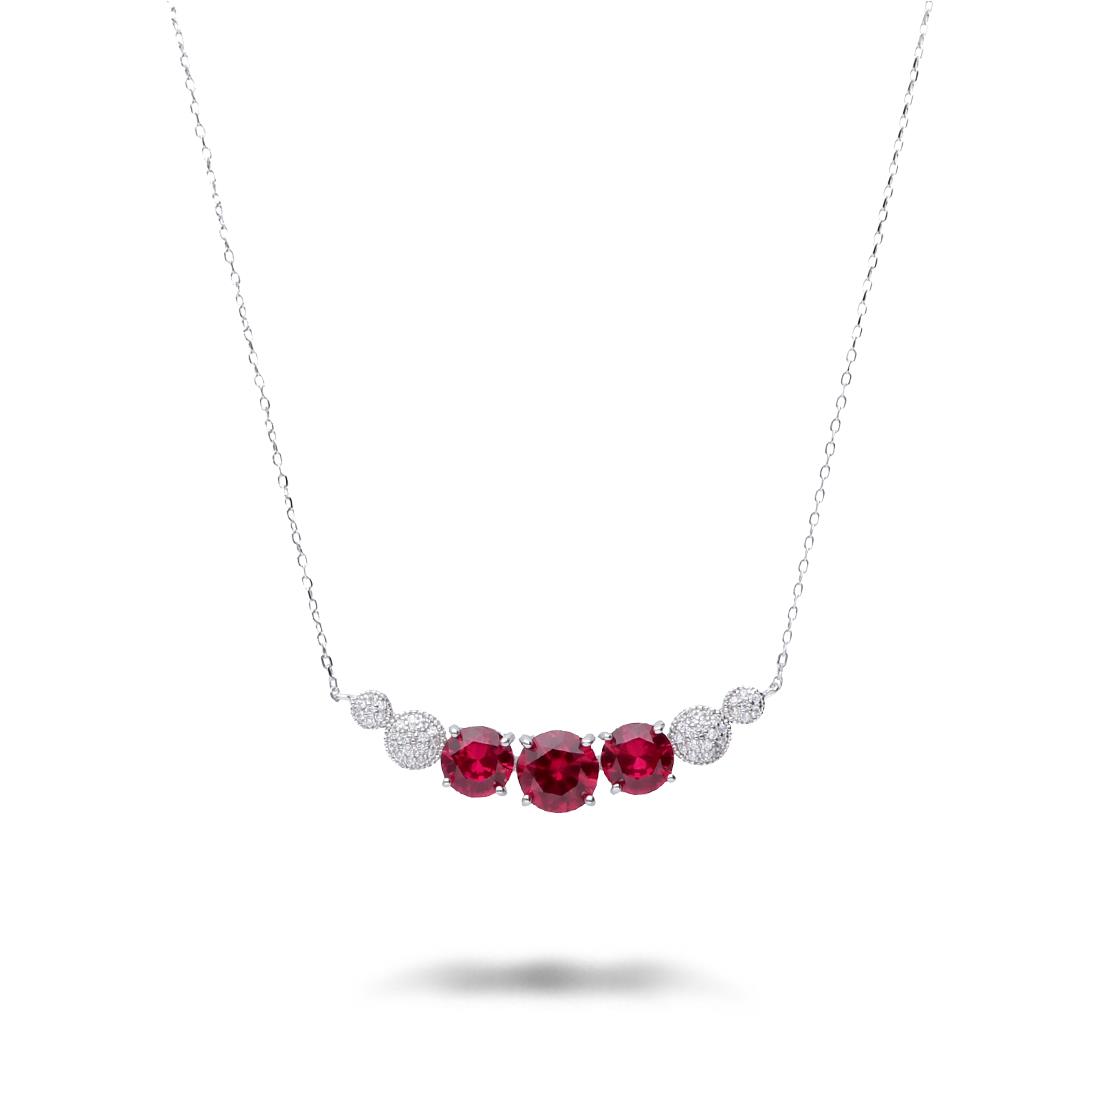 Silver necklace with red and white stones - ORO&CO 925